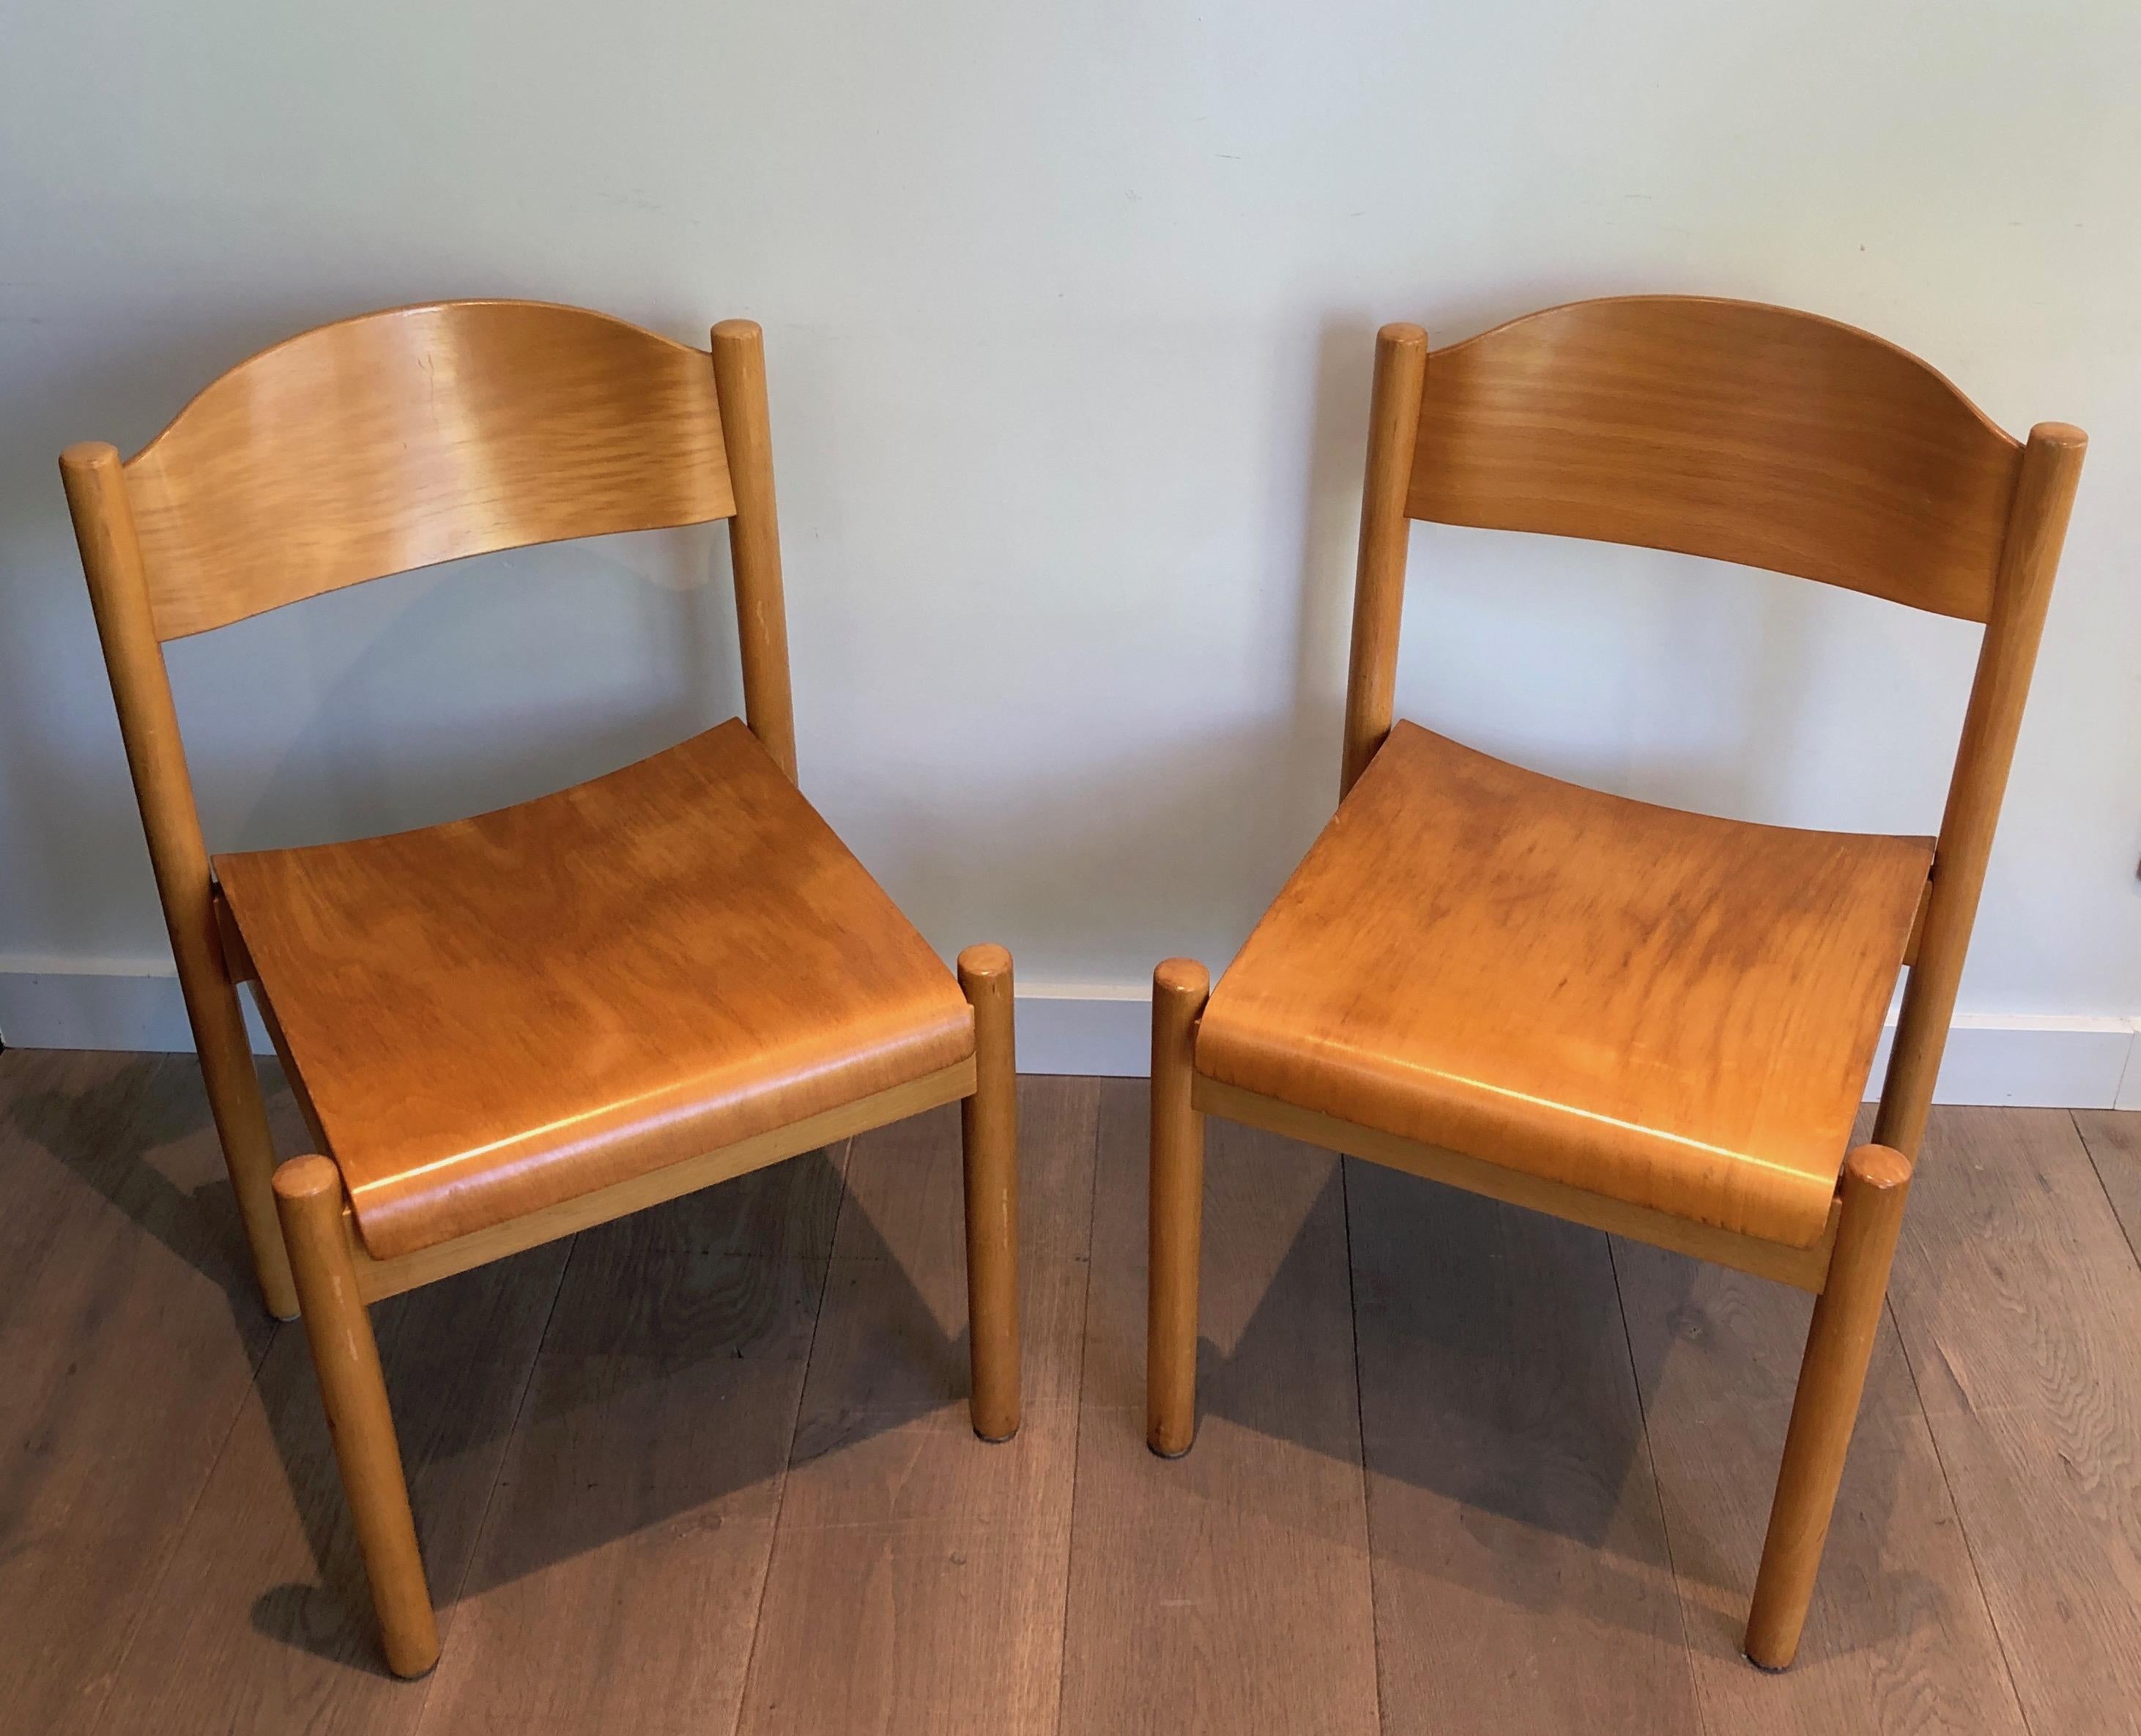 Late 20th Century Set of 6 Stackable Pine Chairs, German Work by Karl Klipper, Circa 1970 For Sale